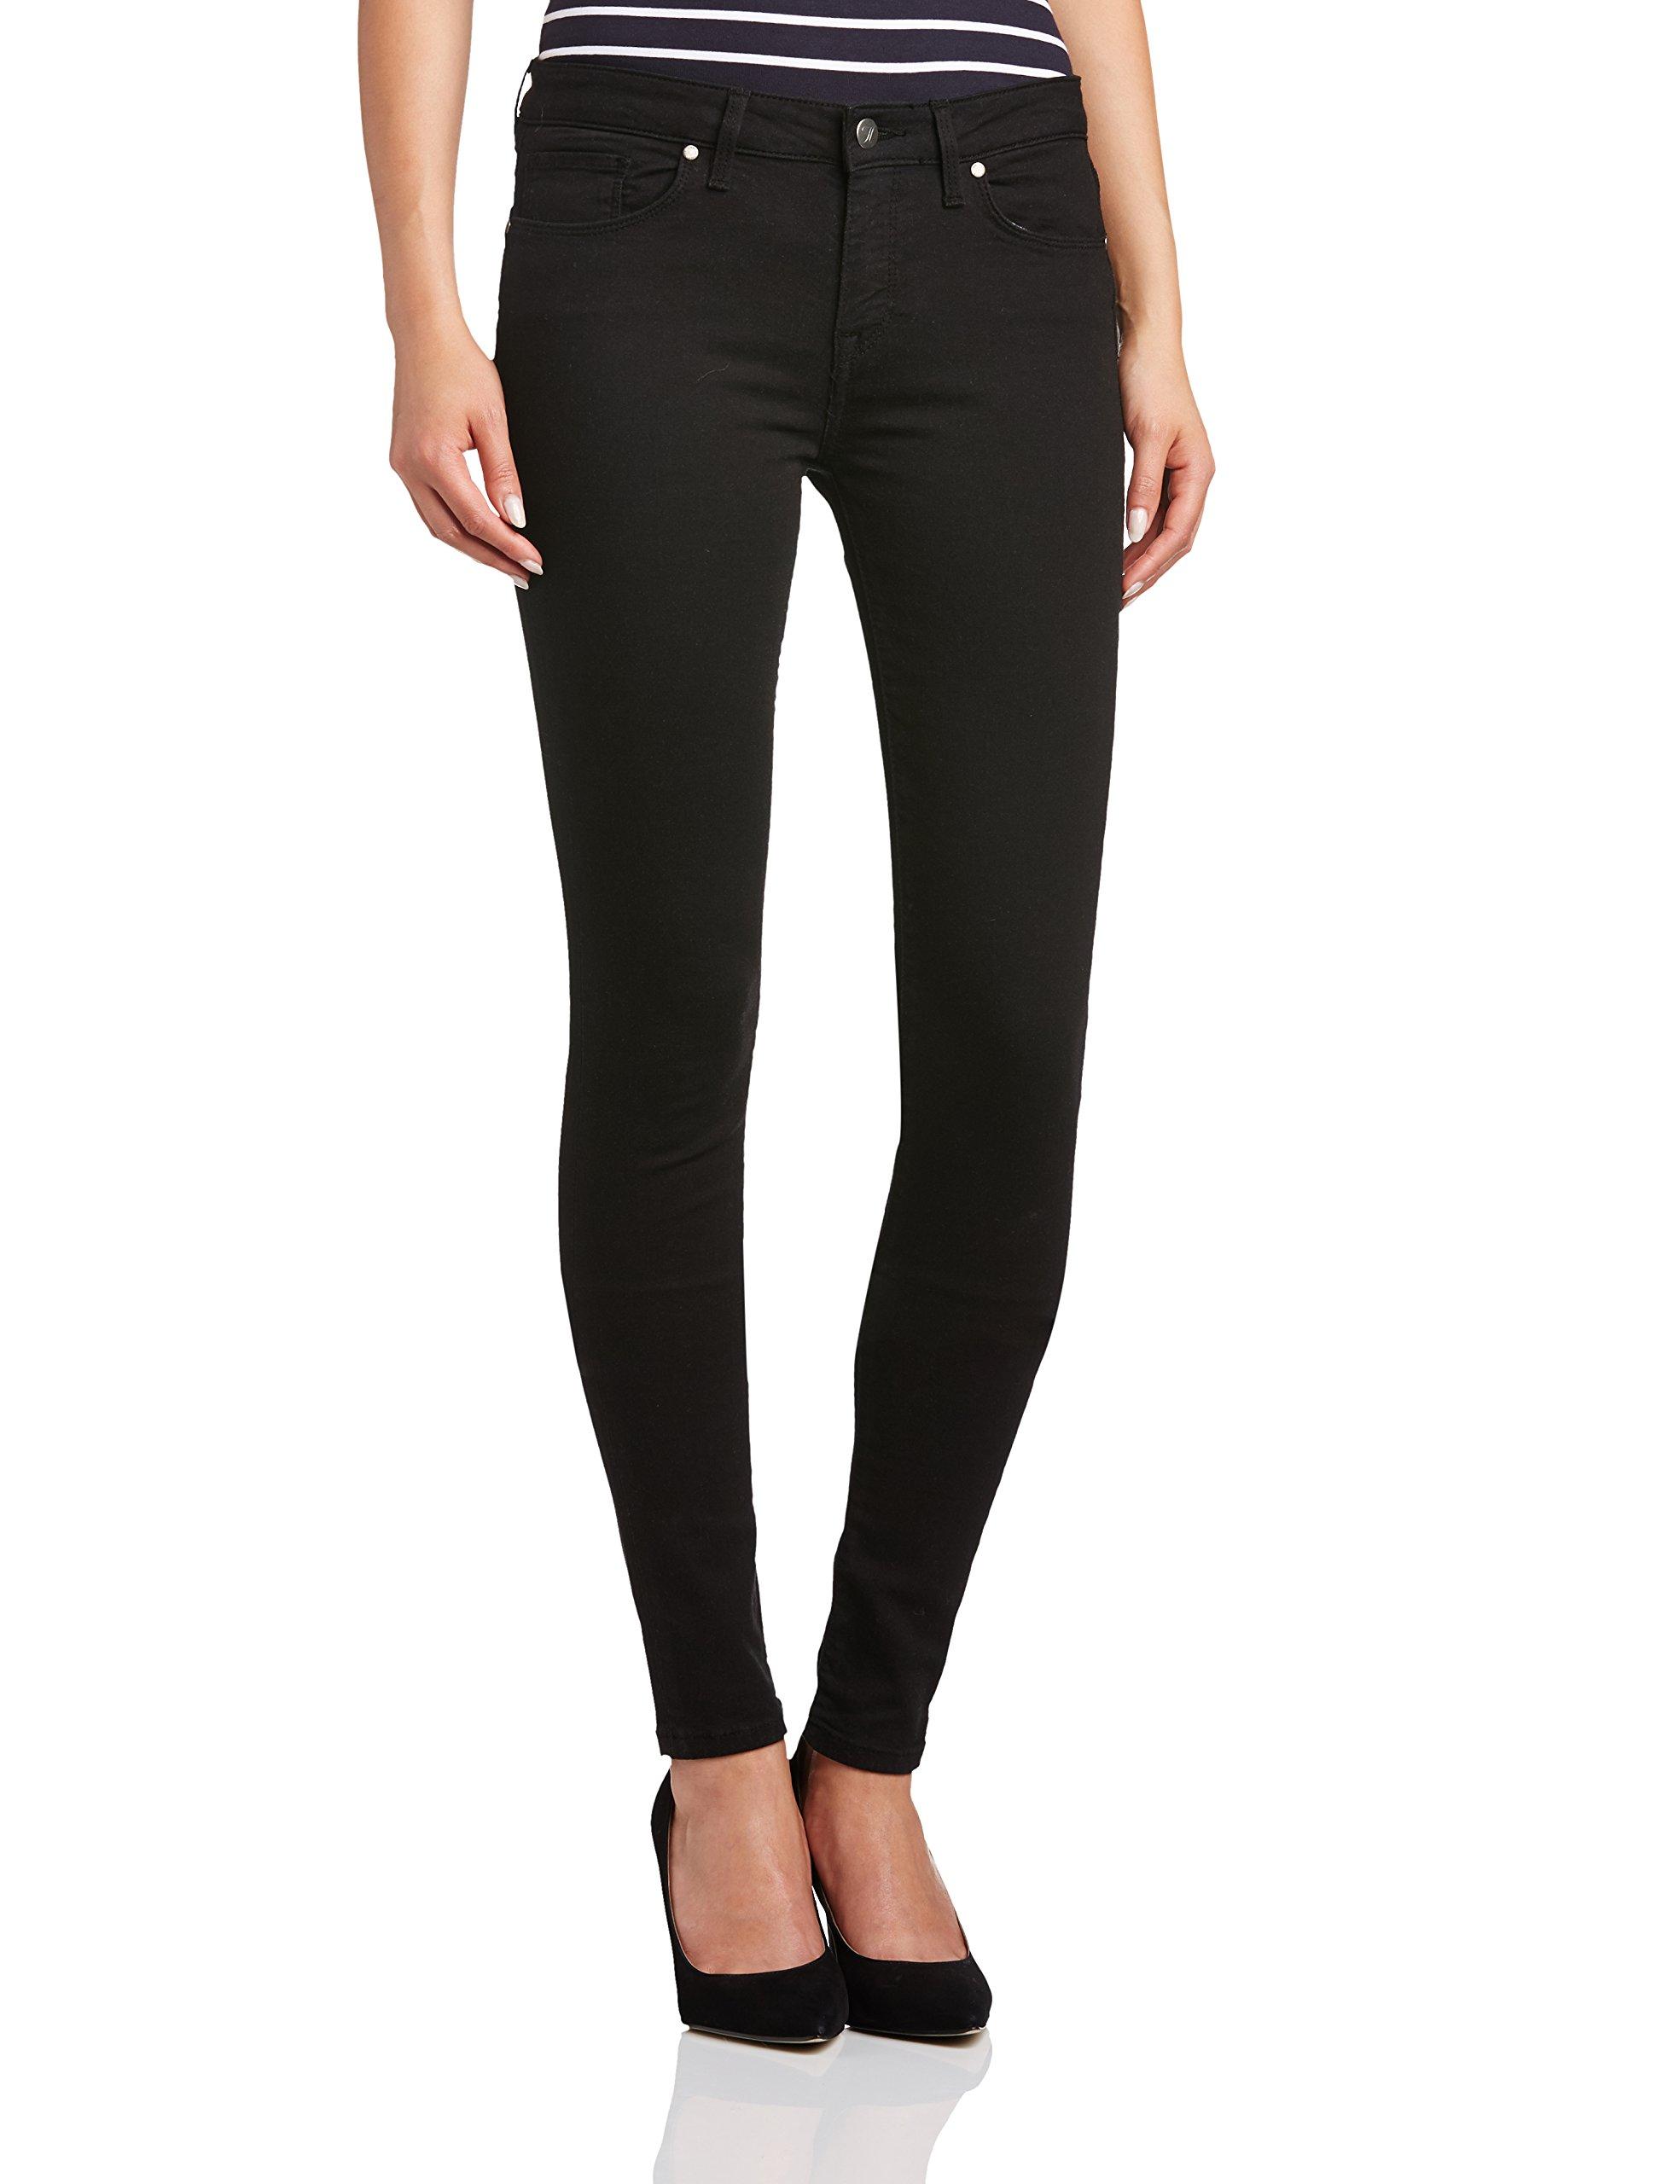 Buy Tommy Hilfiger Women's Jeggings | TO 54%